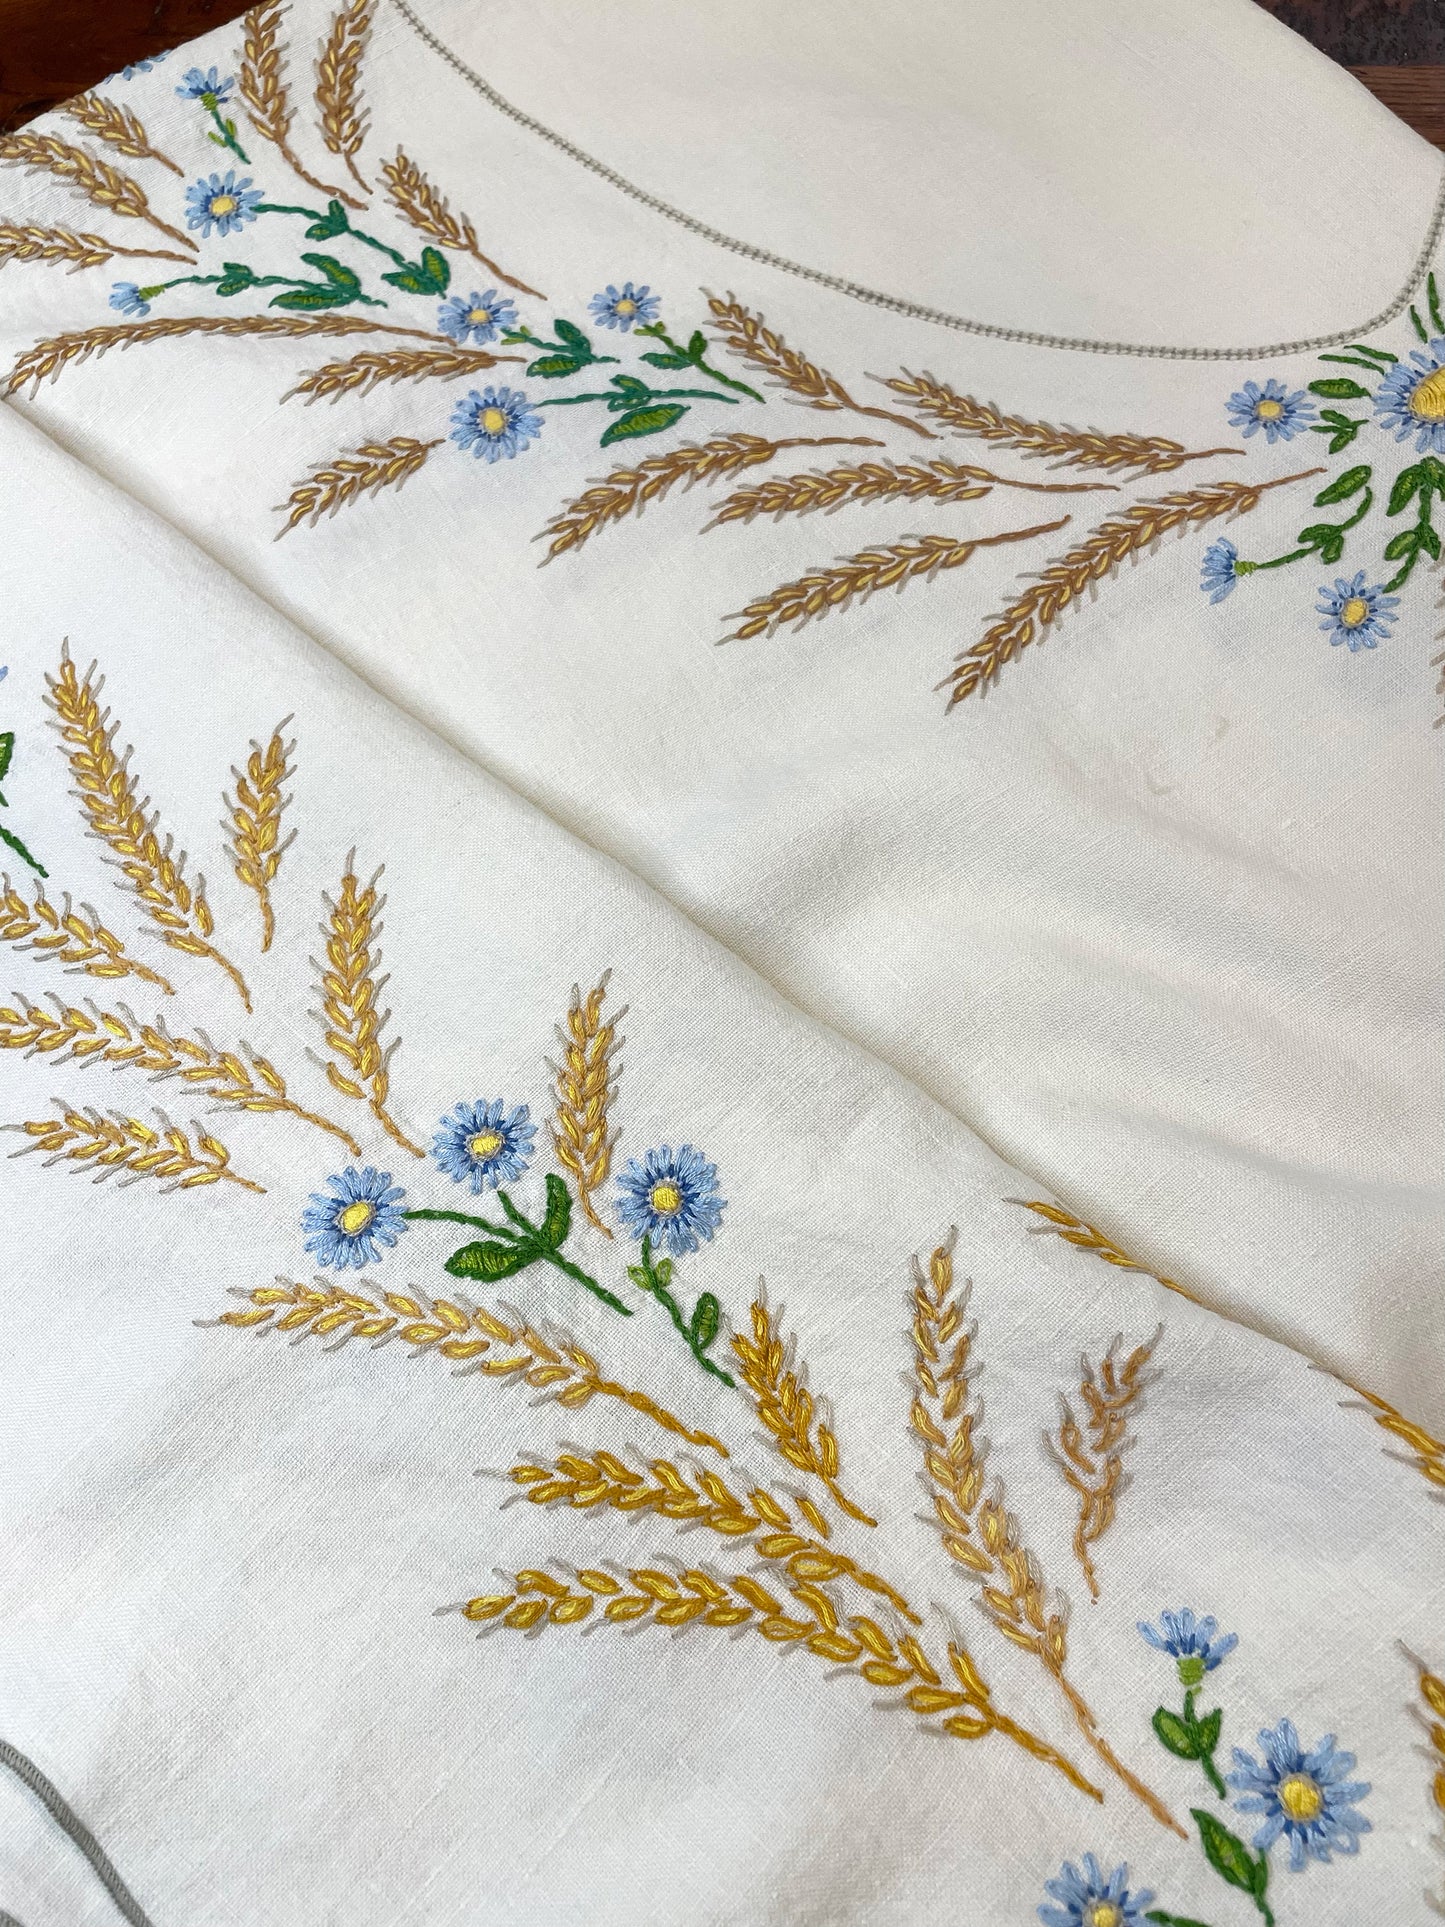 *Made-to-Order* Wheat Fields + Wildflowers Vintage Hand Embroidered Tablecloth Dress ~ Choose Your Size ~ XS - 3X